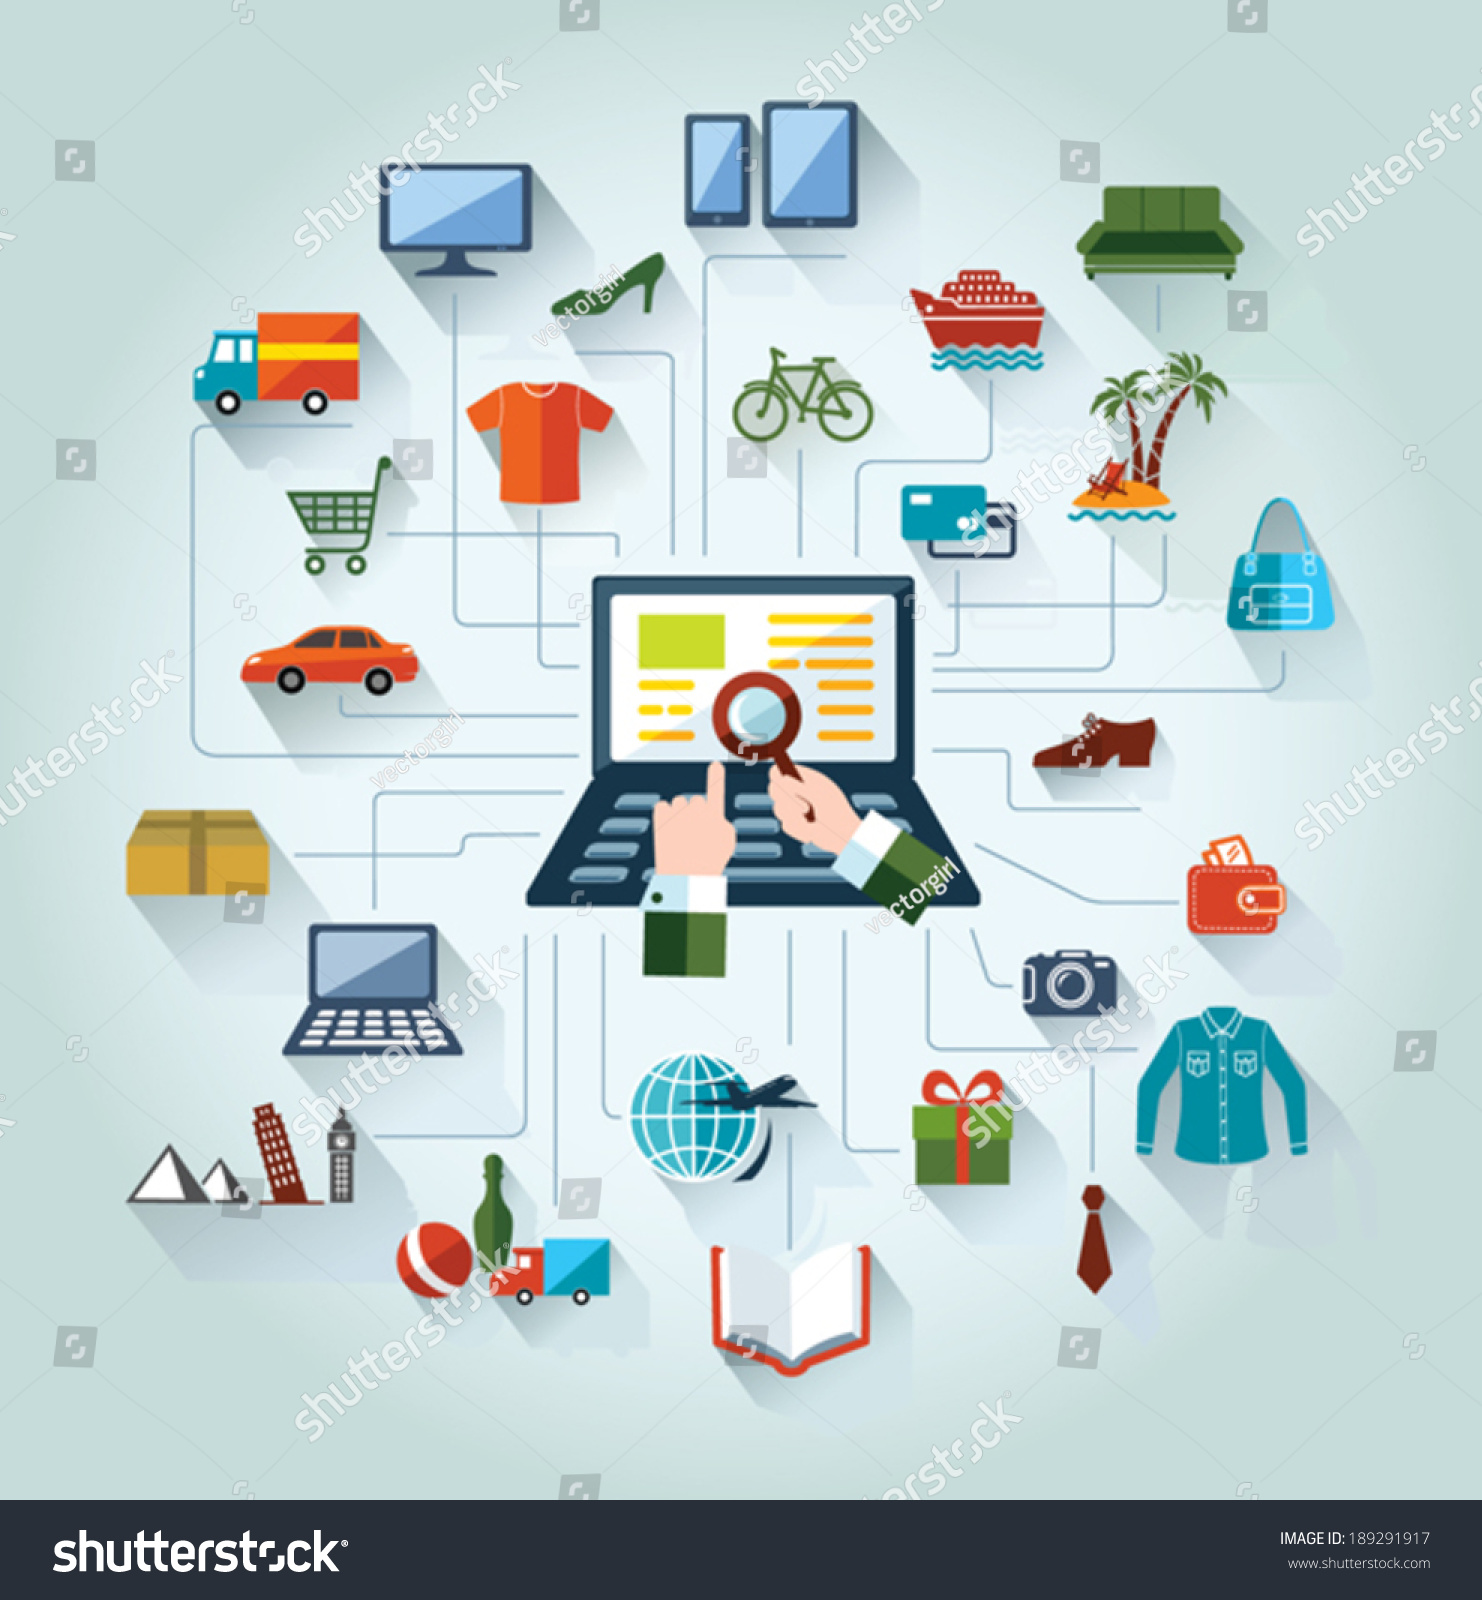 stock-vector-flat-and-web-design-banner-online-shopping-and-business-conceptual-background-189291917.jpg